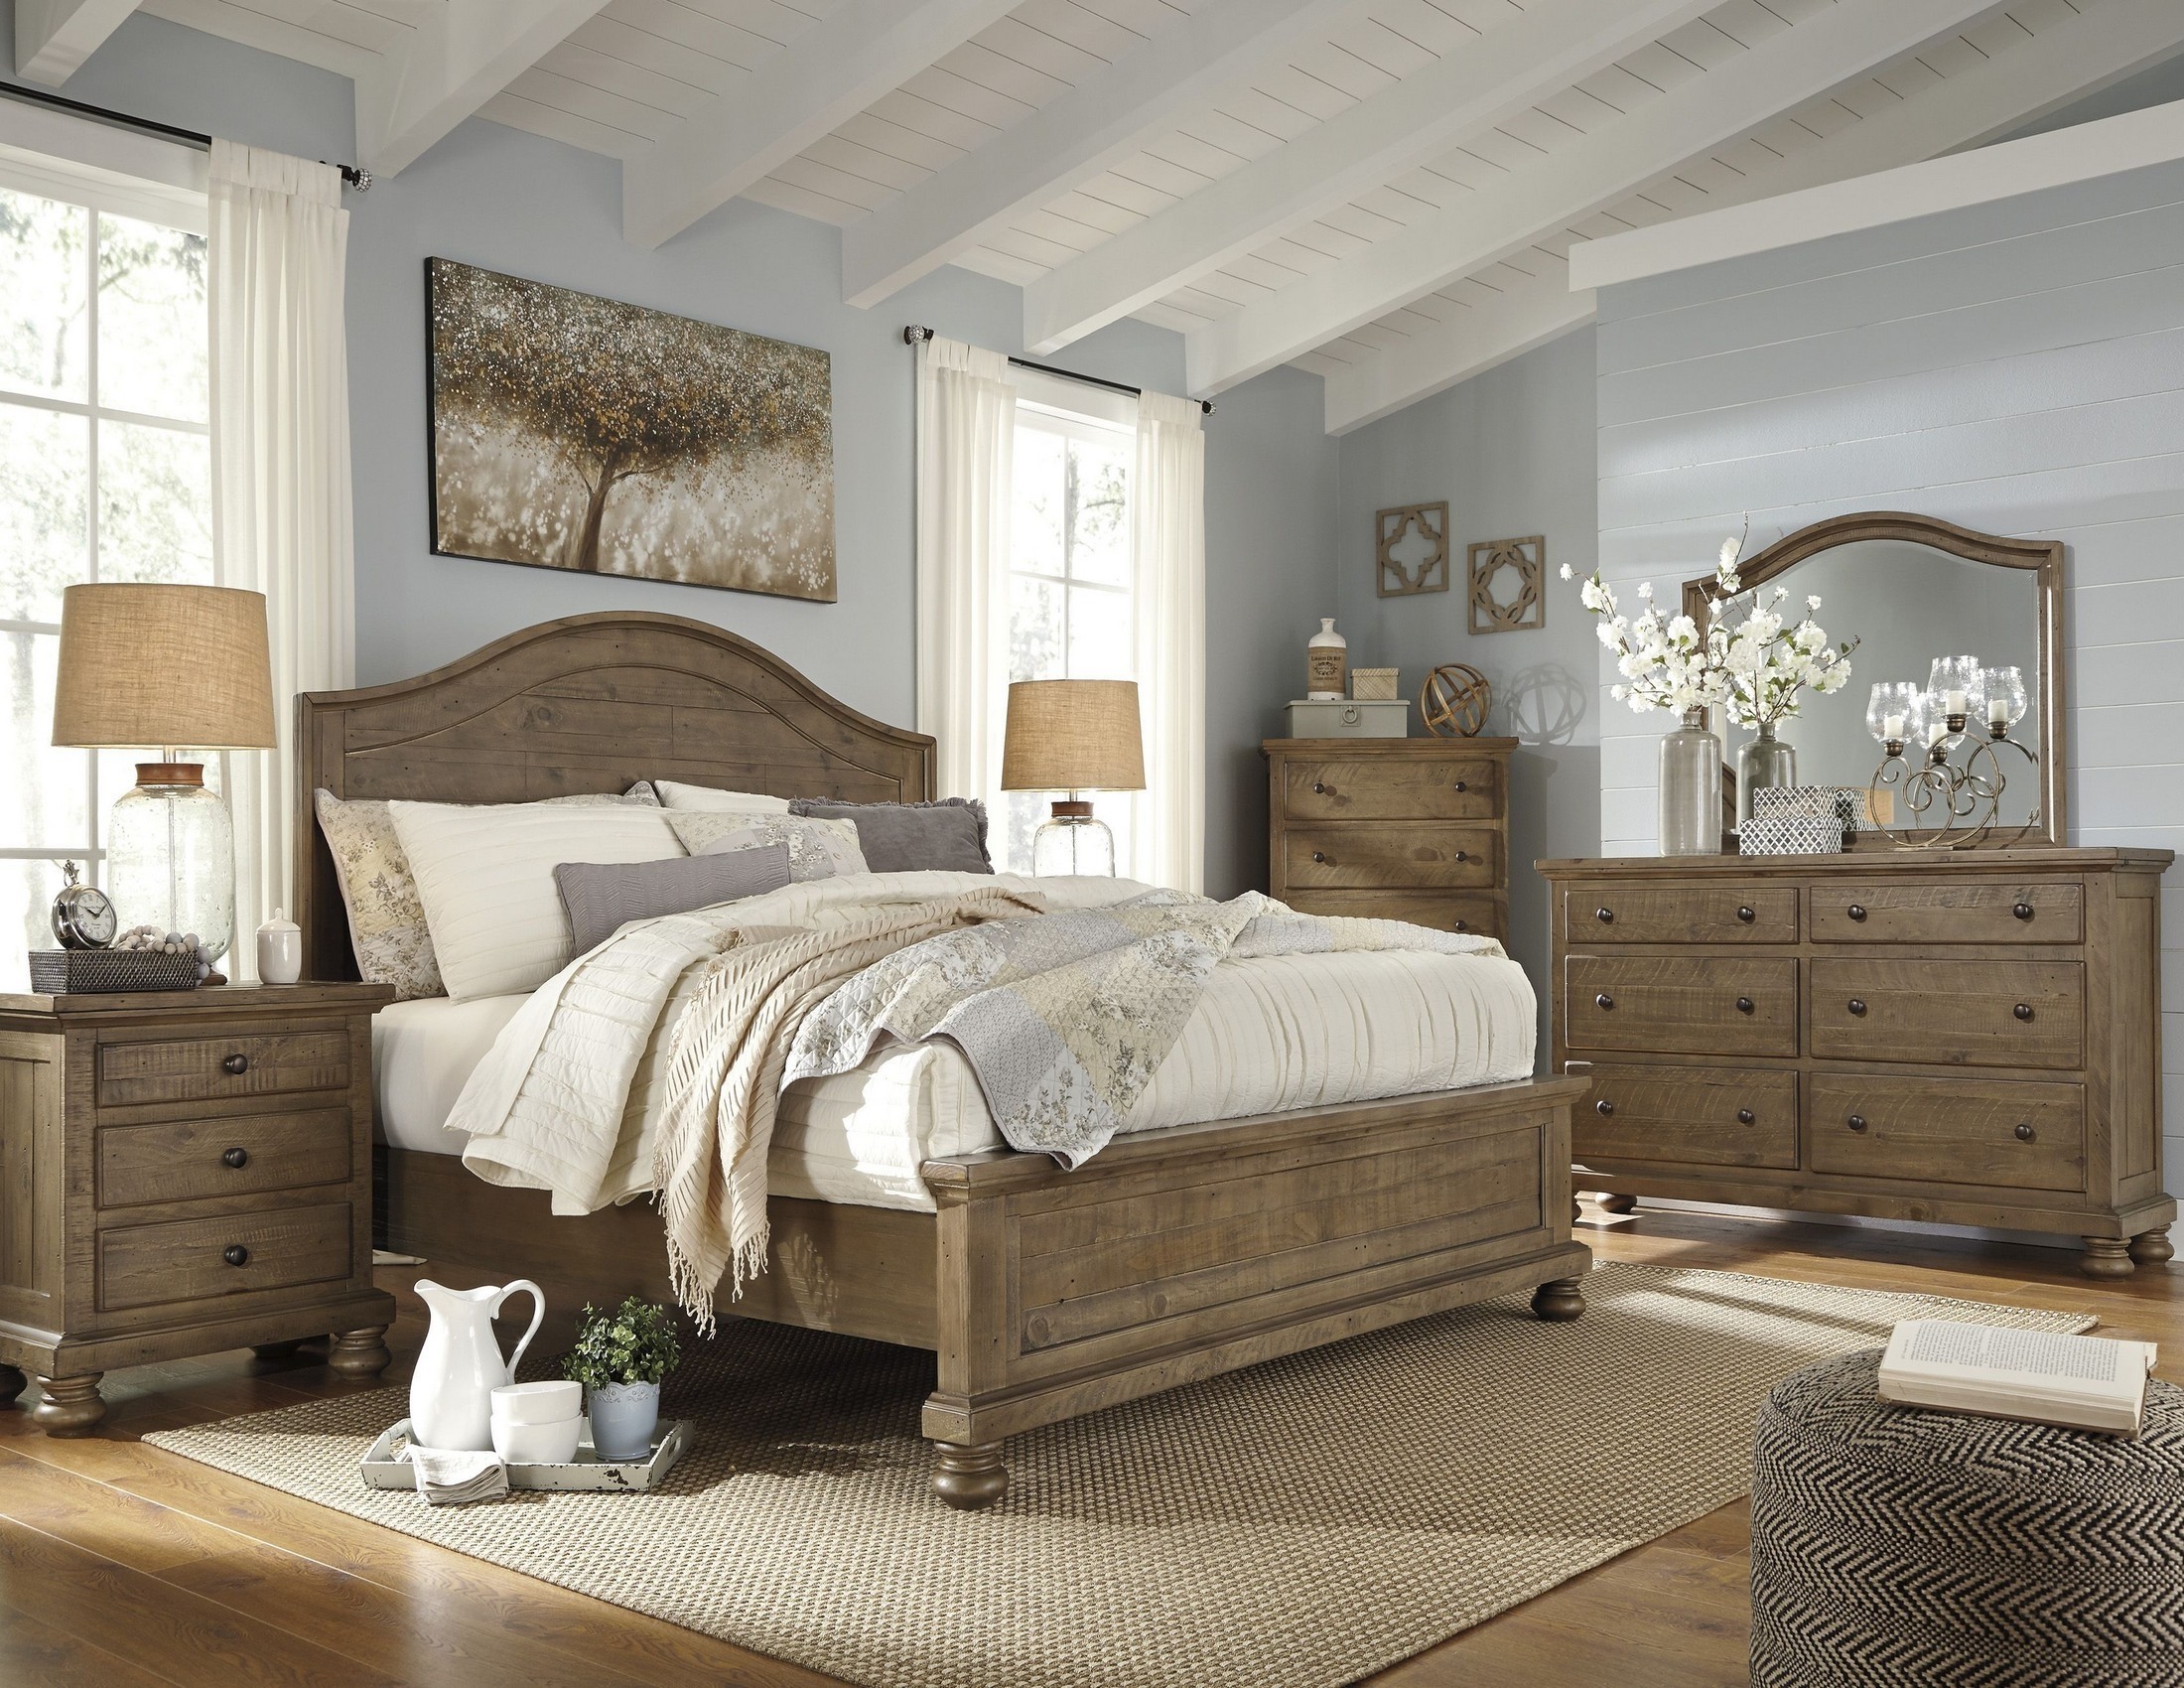 Brown Bedroom Furniture With Canopy Bed